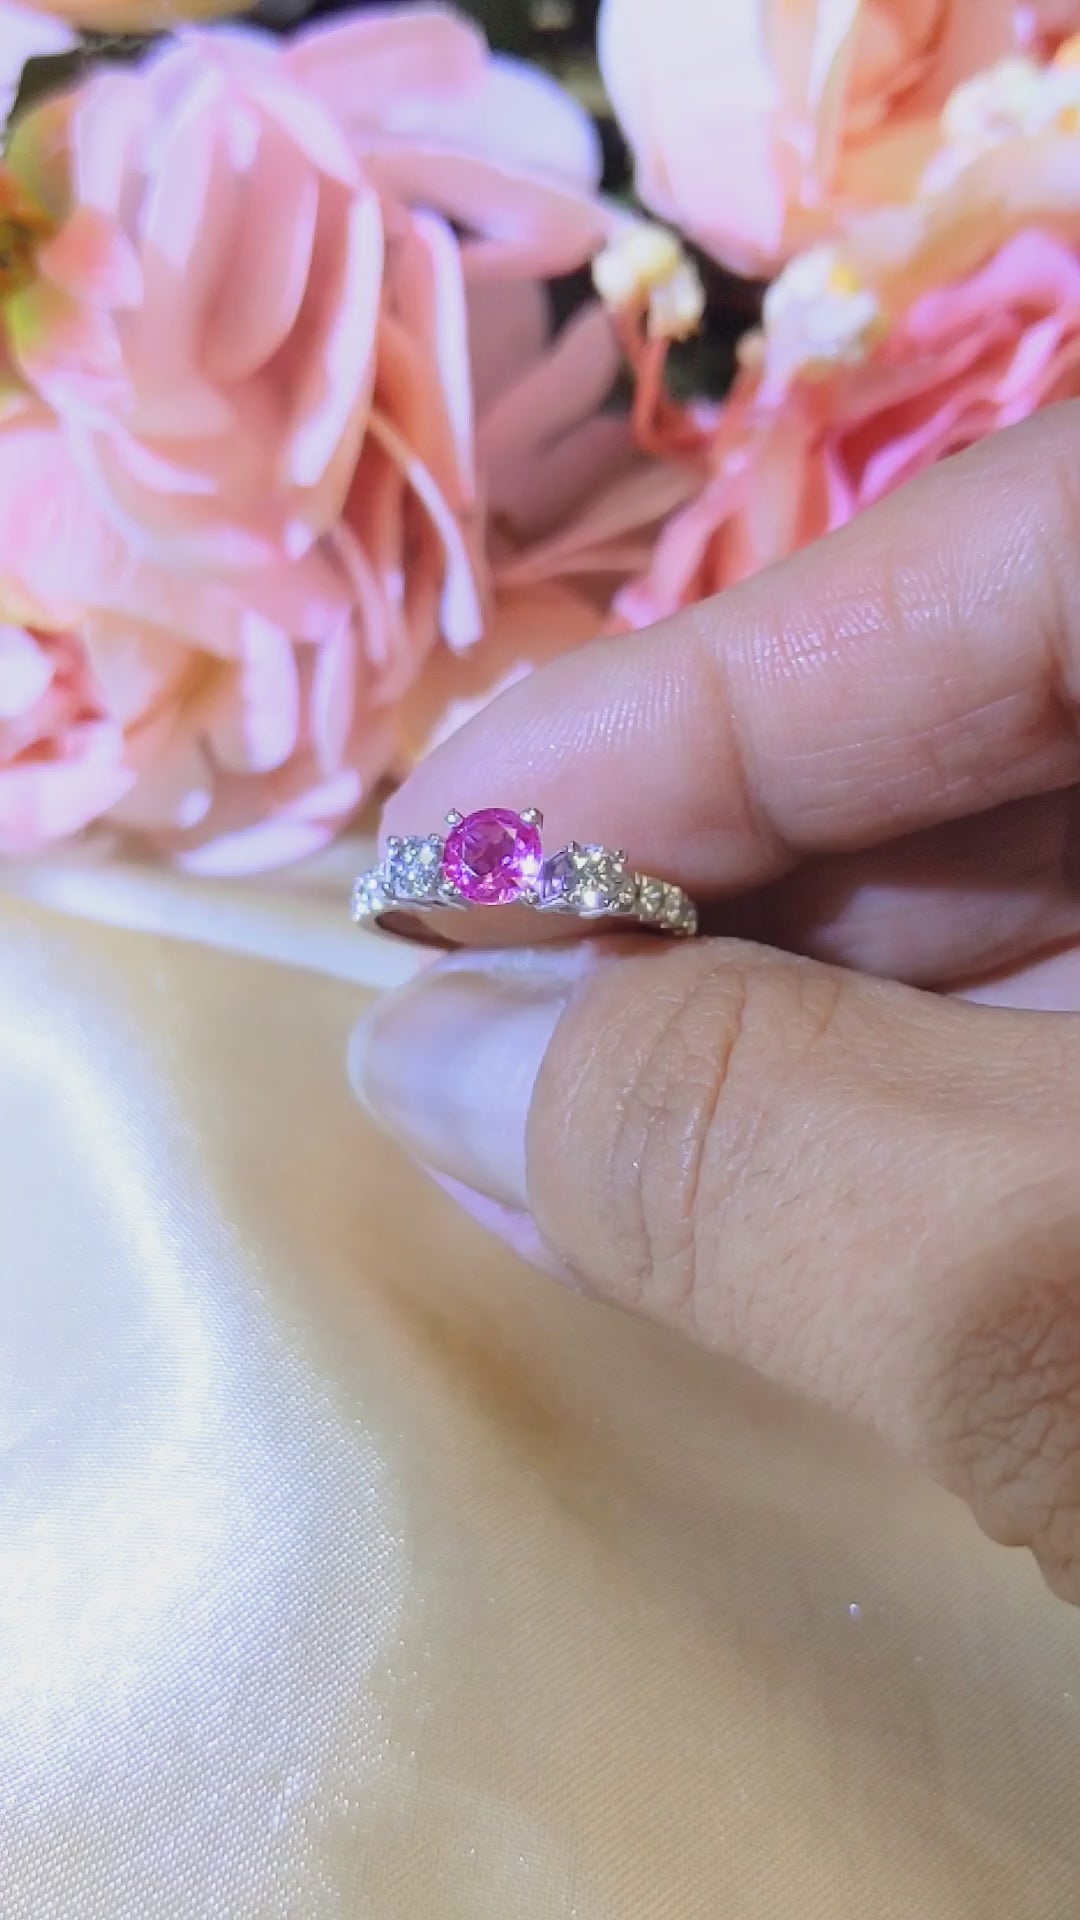 5MM Round Cut Natural Pink Sapphire & 0.58 Ct. Tw. Diamond Ring